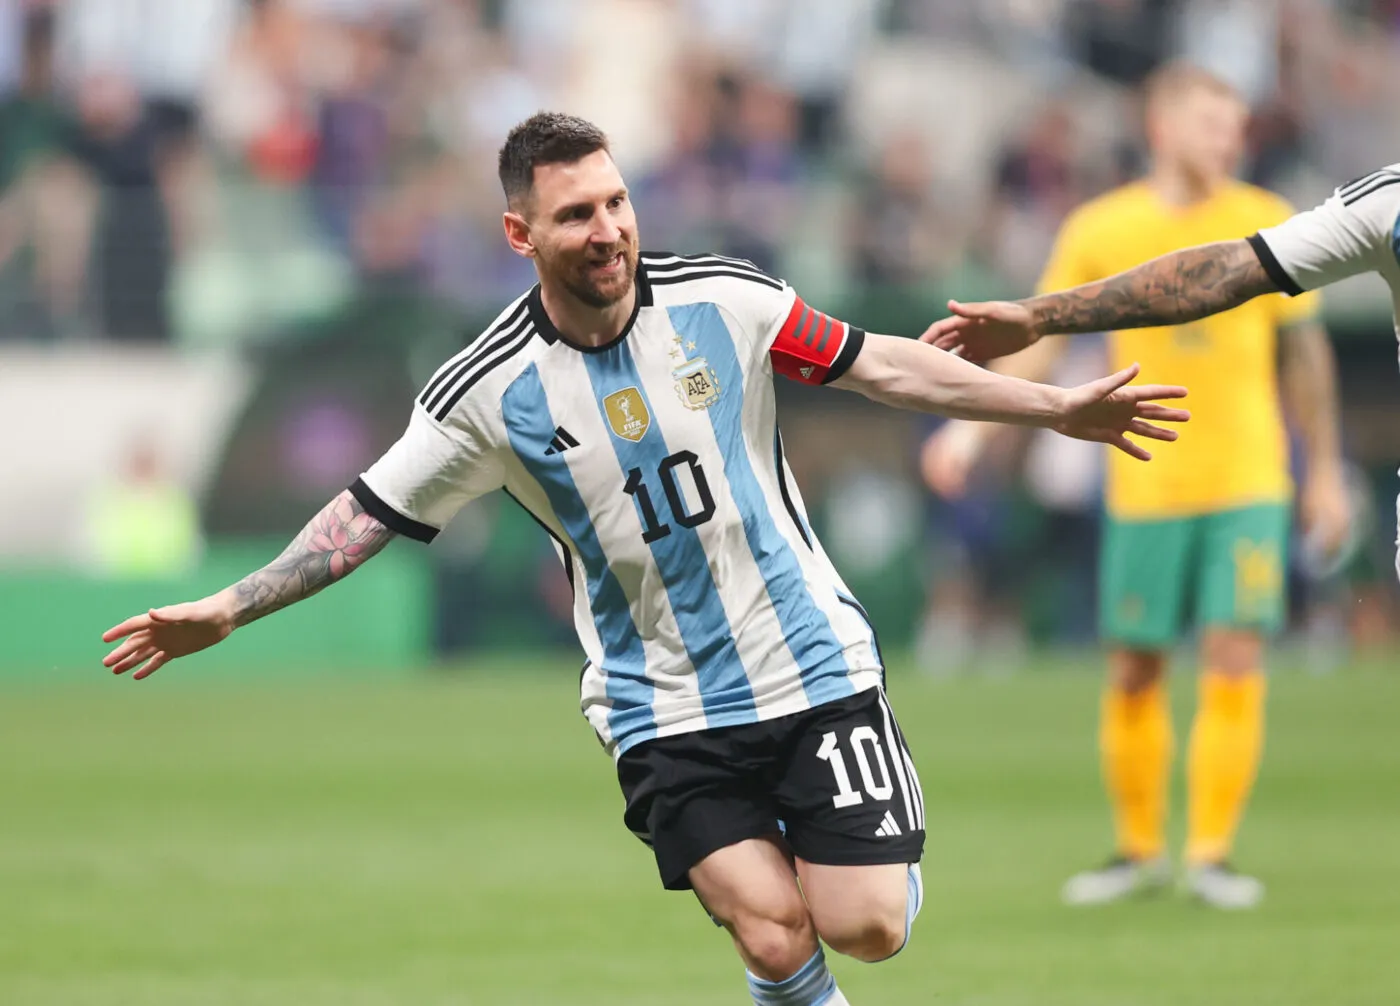 (230615) -- BEIJING, June 15, 2023 (Xinhua) -- Lionel Messi of Argentina celebrates his goal during an international football invitational between Argentina and Australia in Beijing, capital of China, June 15, 2023. (Xinhua/Jia Haocheng) - Photo by Icon sport